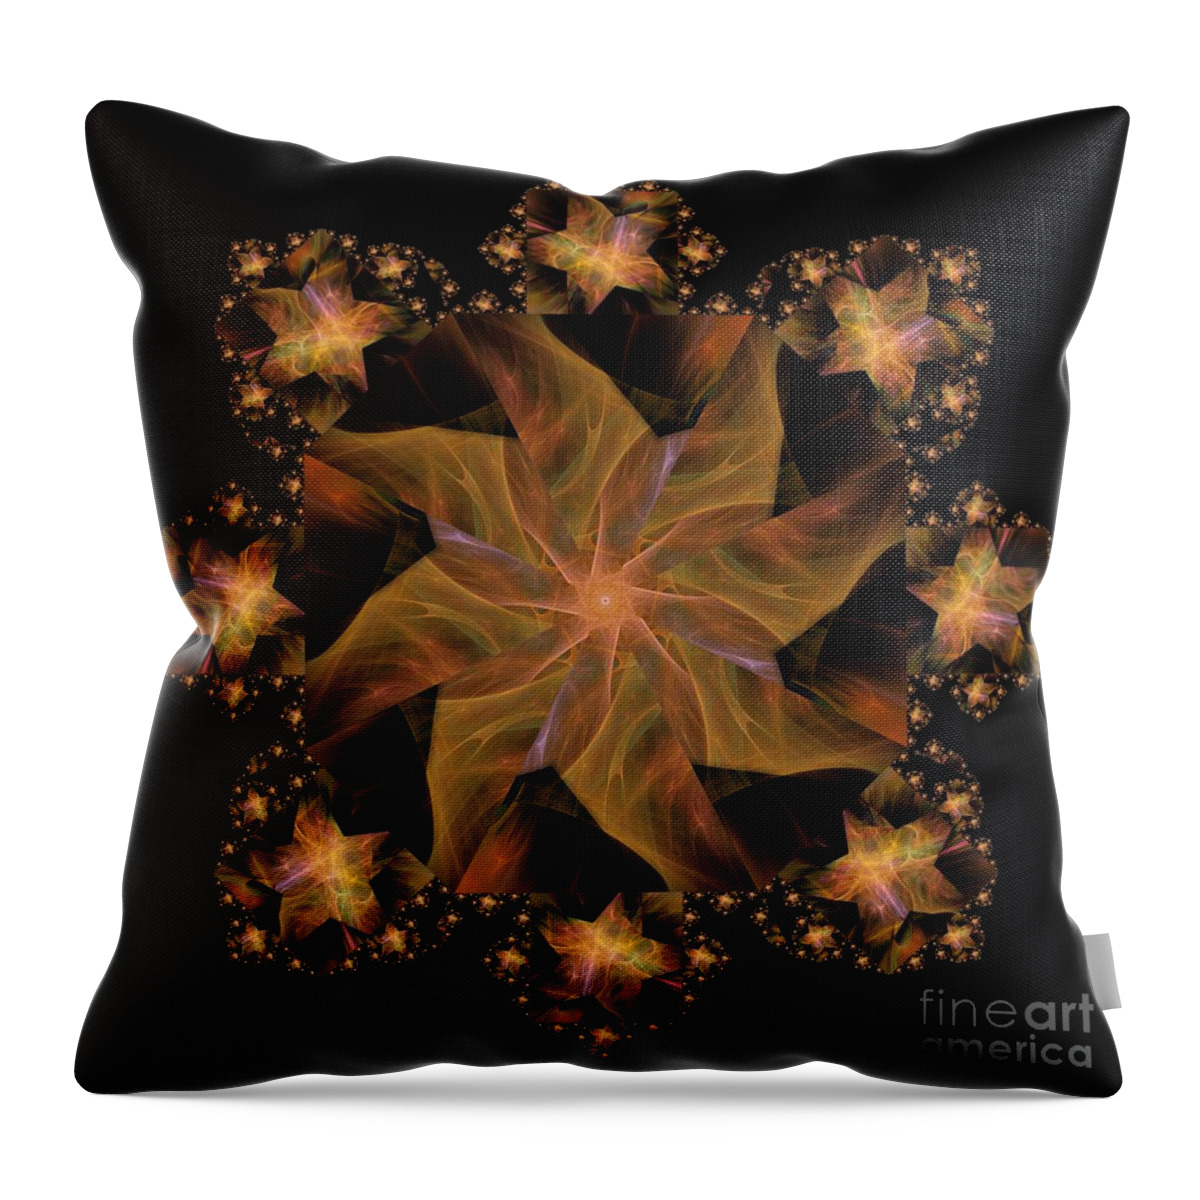 Star Throw Pillow featuring the digital art Not So Black Star / Kaleidoscope  by Elizabeth McTaggart